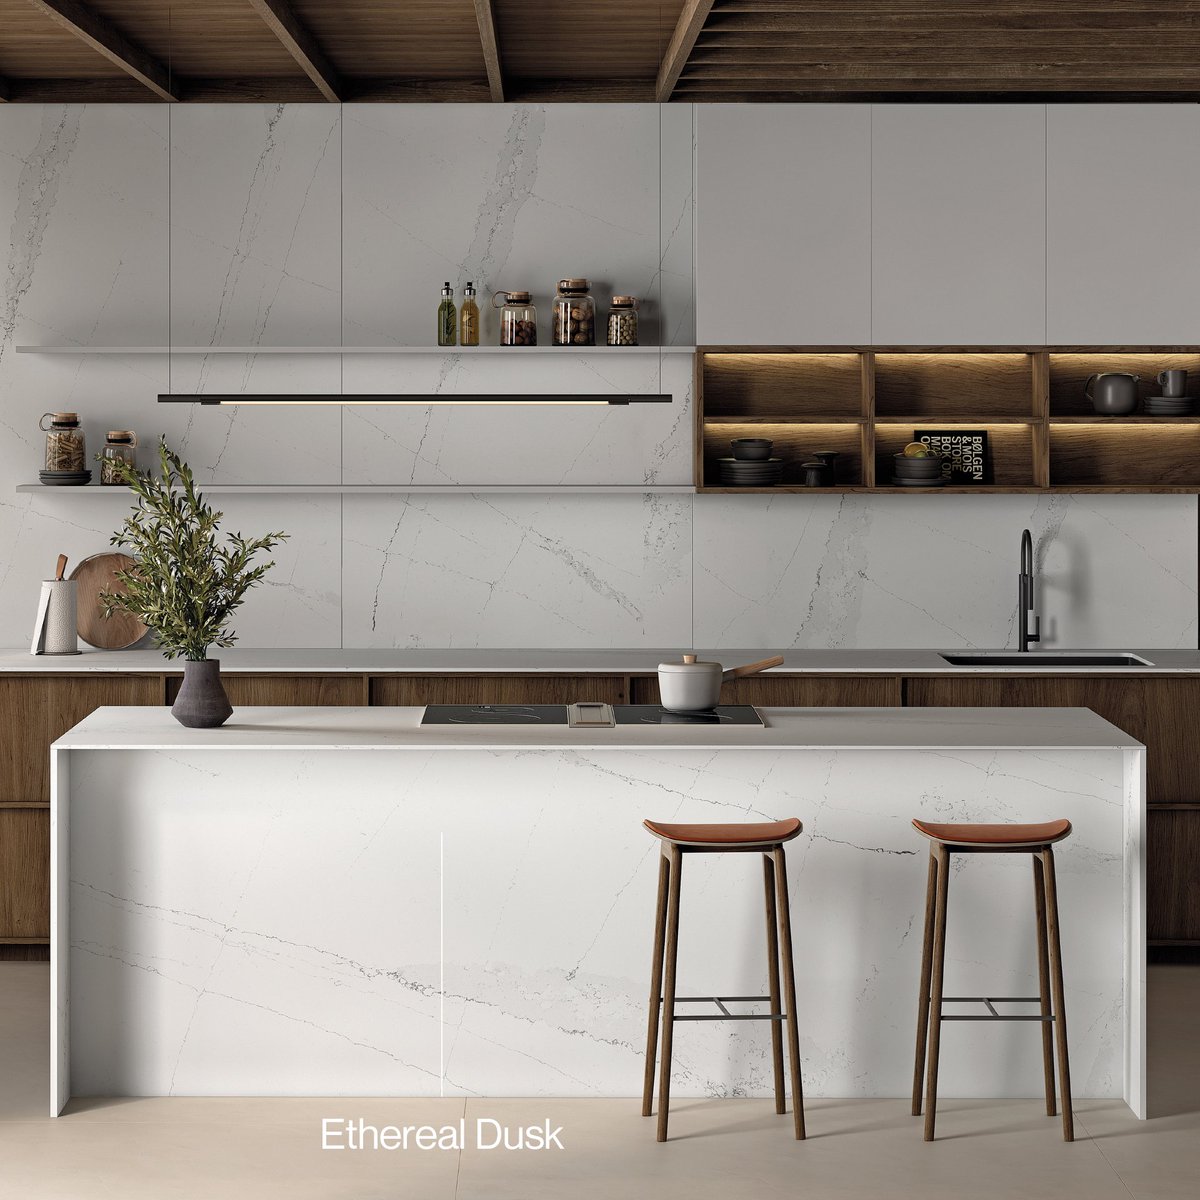 Just as every day is a fresh start, @Silestone Ethereal Dusk creates a fresh, new look for your home. Discover what makes this new shade from our Ethereal collection so unique at bit.ly/3nEQOBU. #SilestoneEthereal #HybriQTechonology